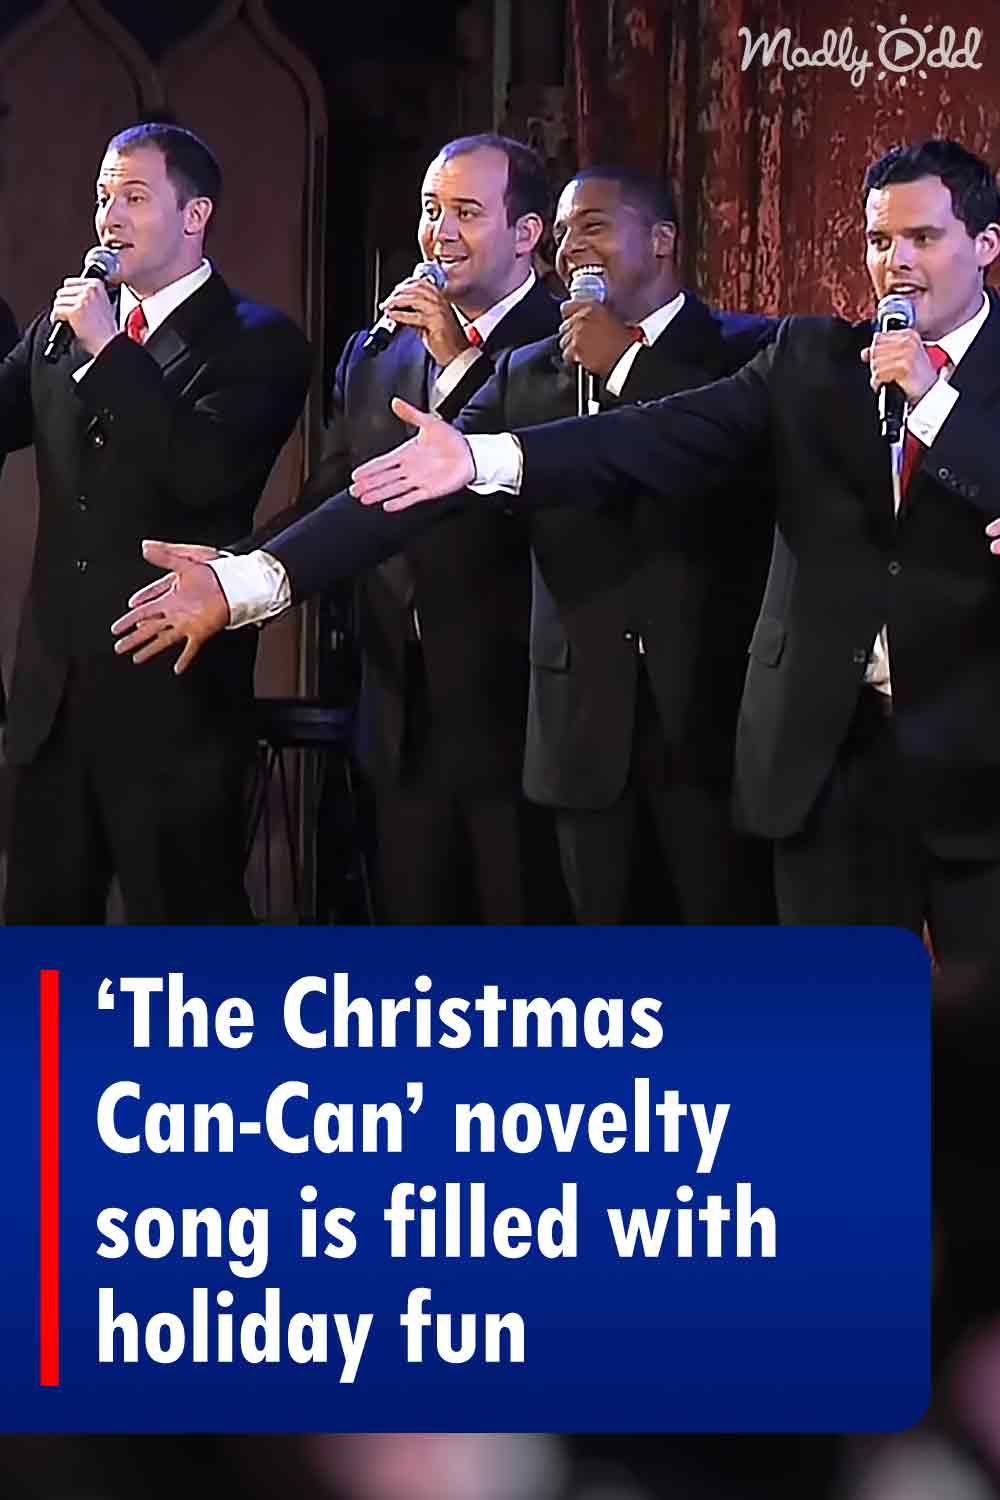 ‘The Christmas Can-Can’ novelty song is filled with holiday fun